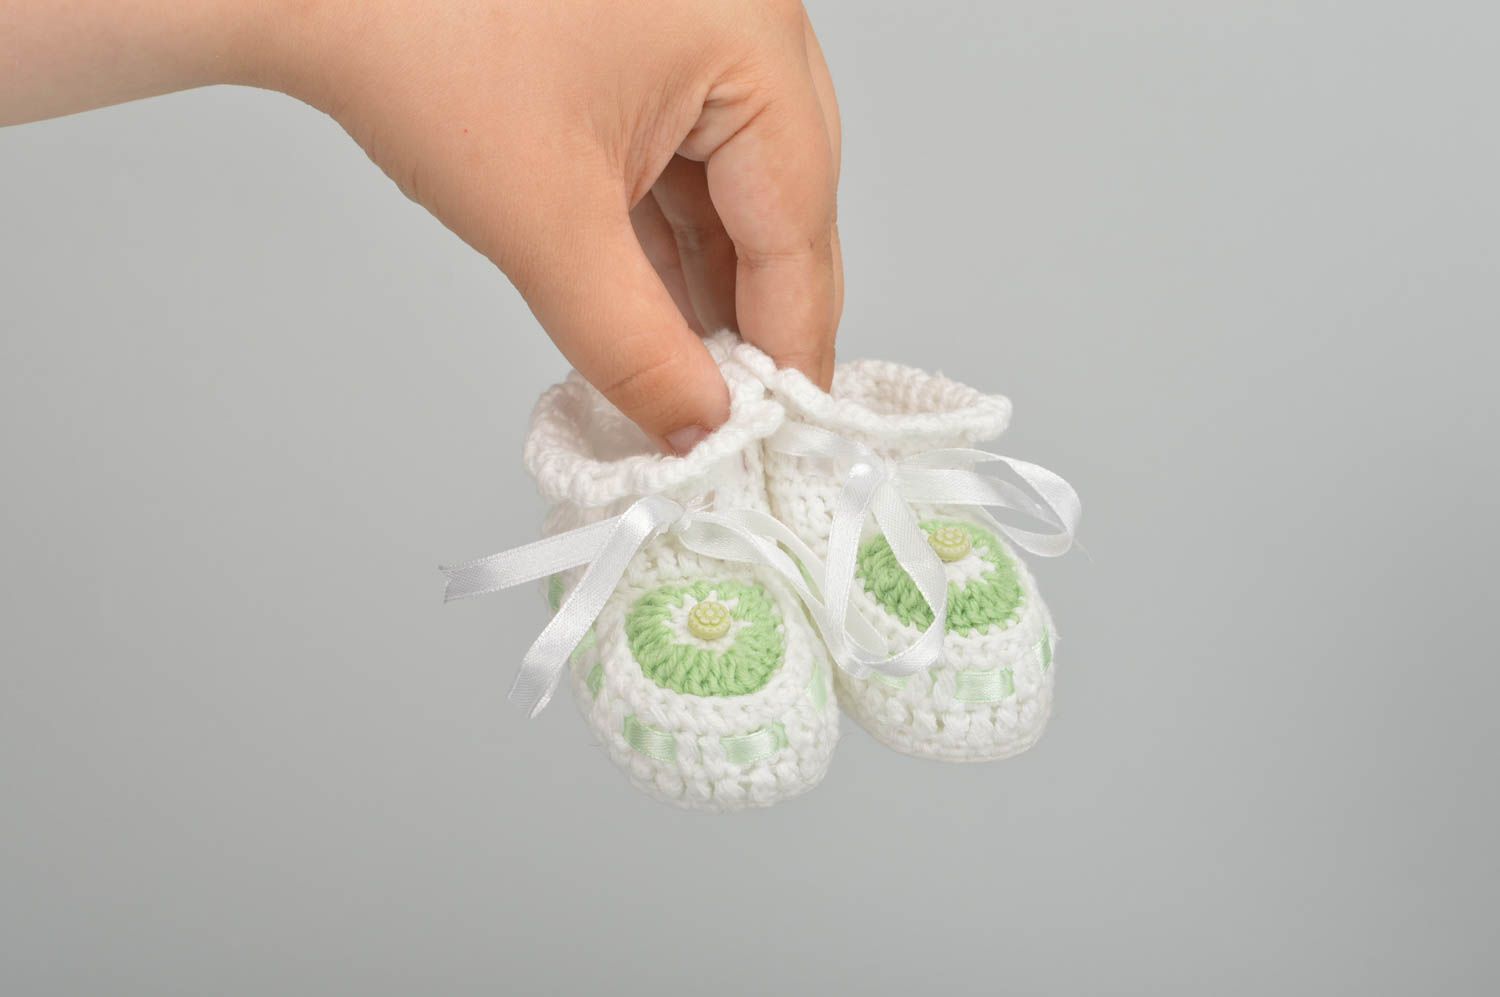 Stylish handmade baby booties crochet baby booties cute baby outfits gift ideas photo 1